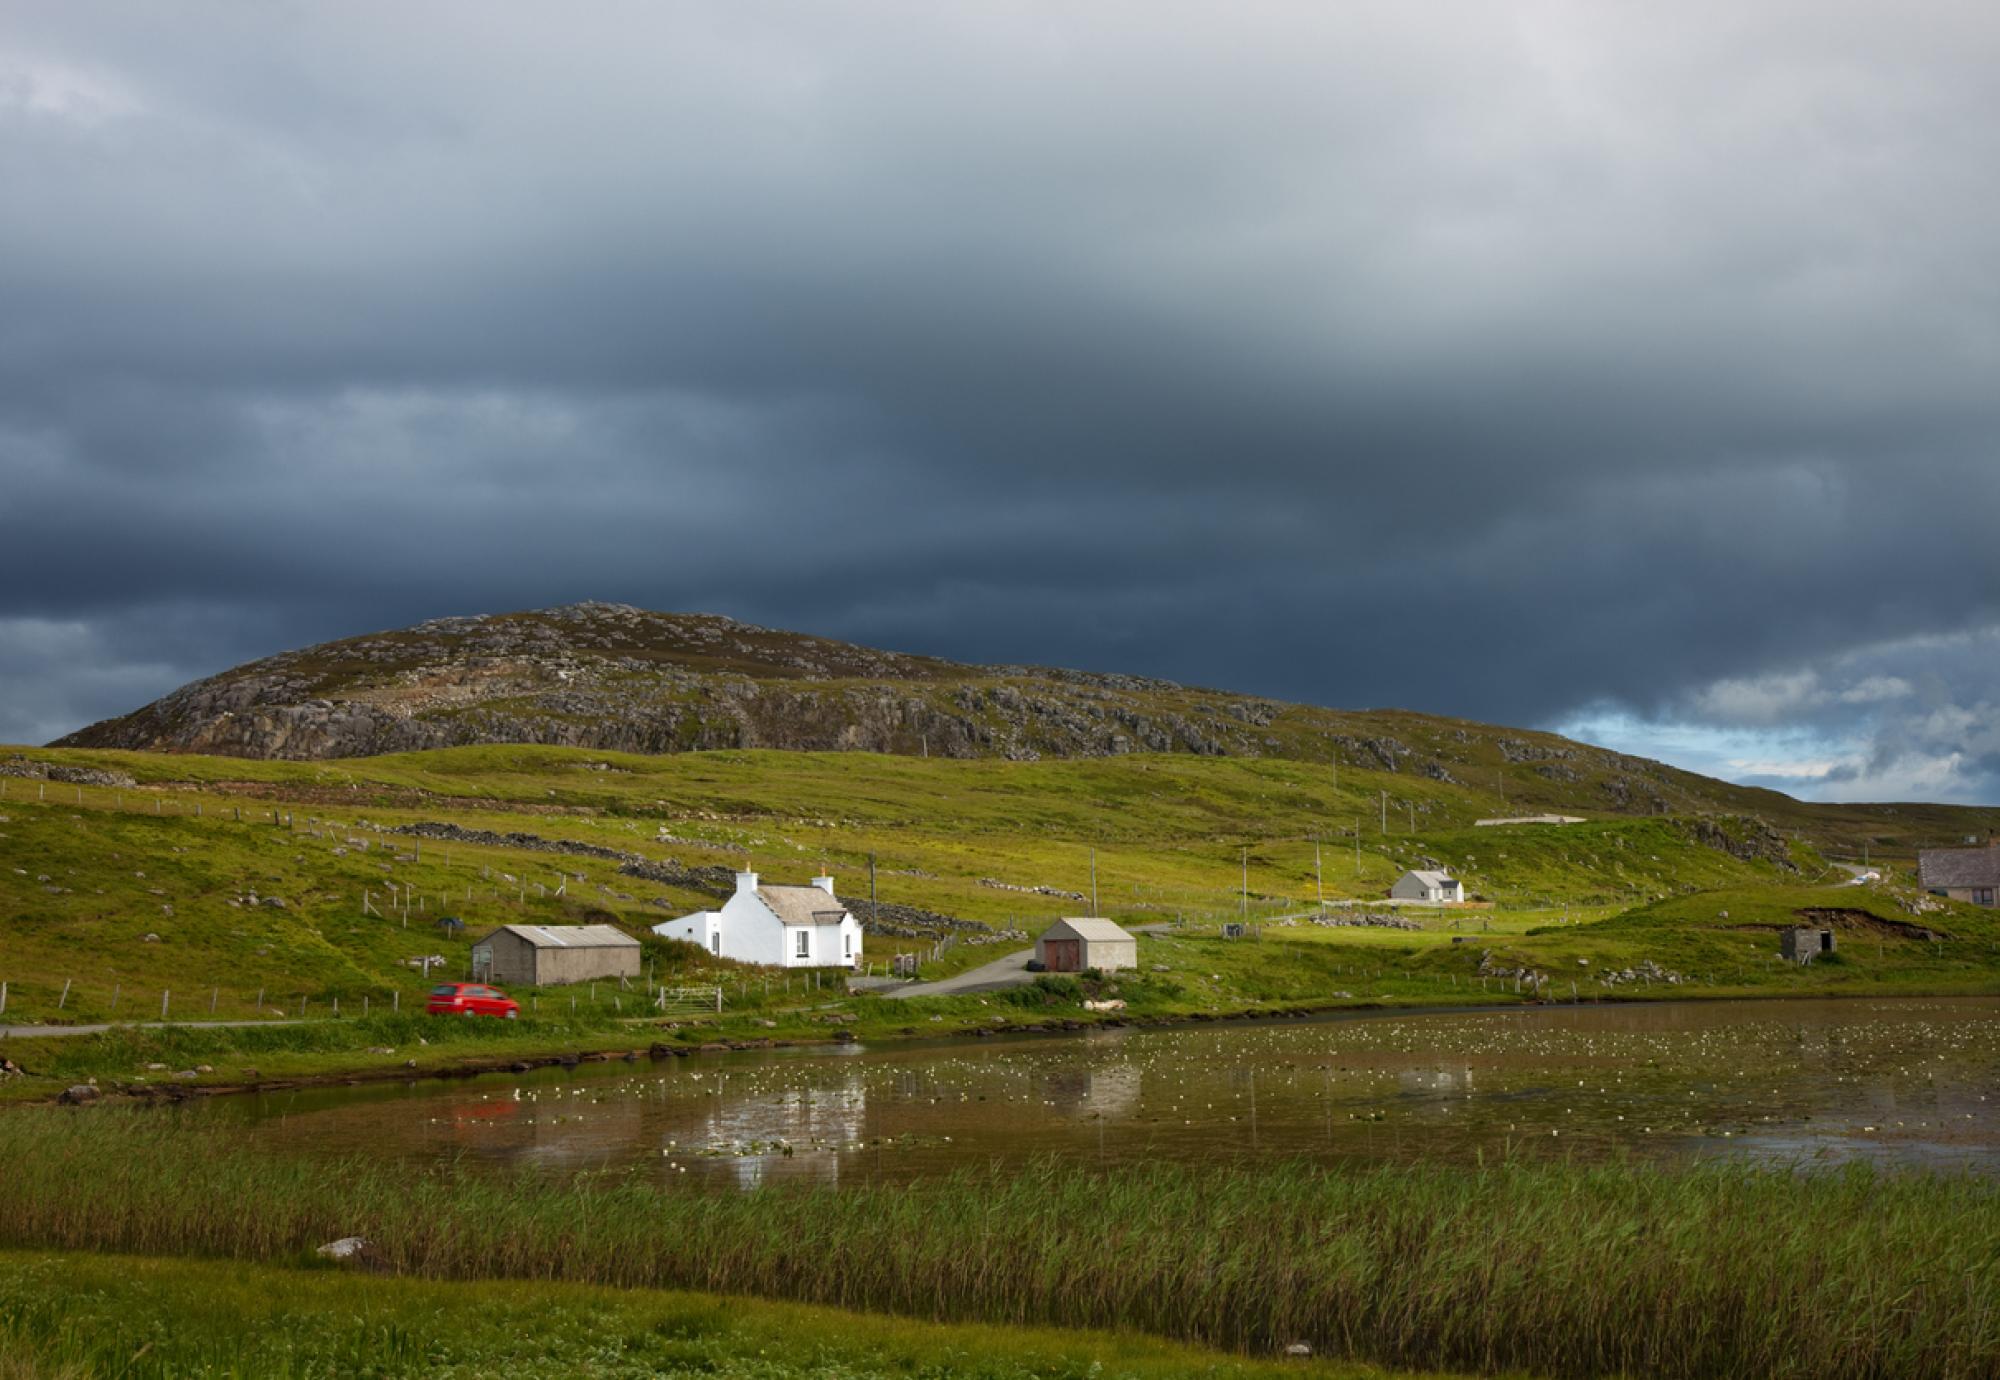 A croft in the Outer Hebrides of Scotland